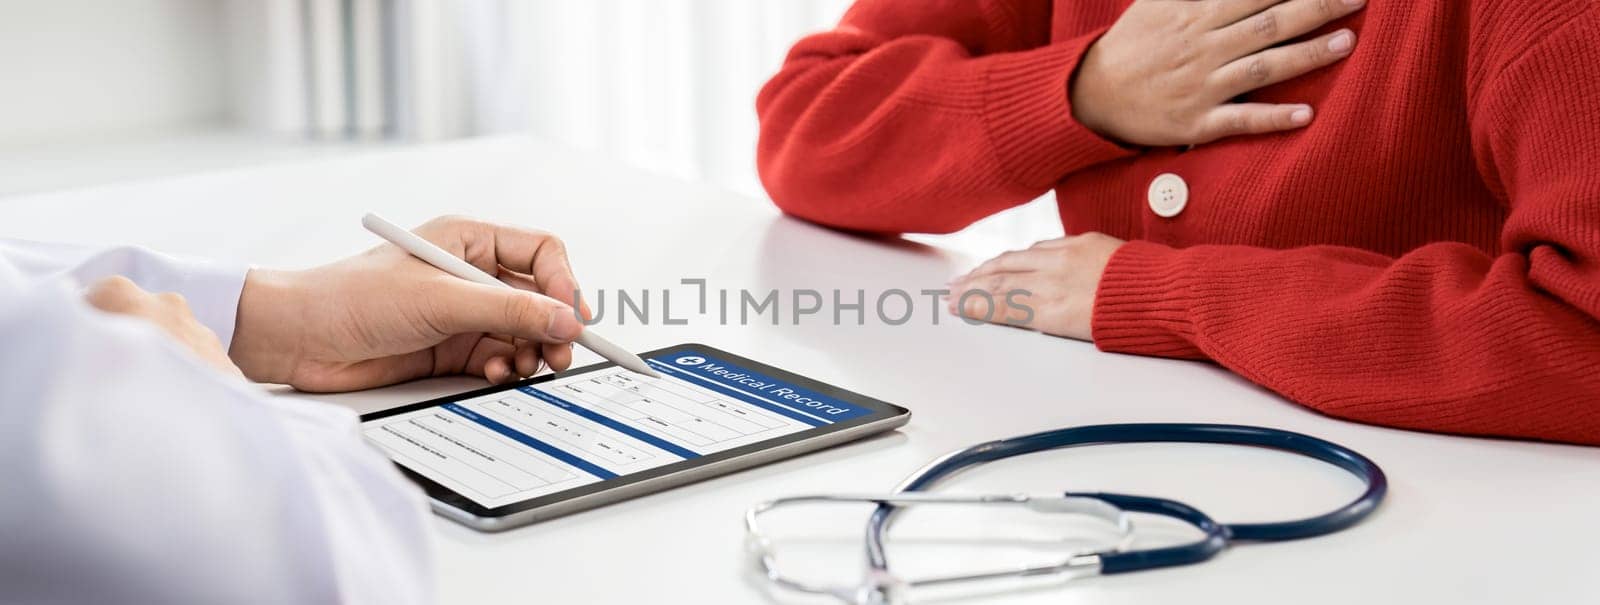 Patient attend doctor's appointment at clinic or hospital office. Rigid by biancoblue